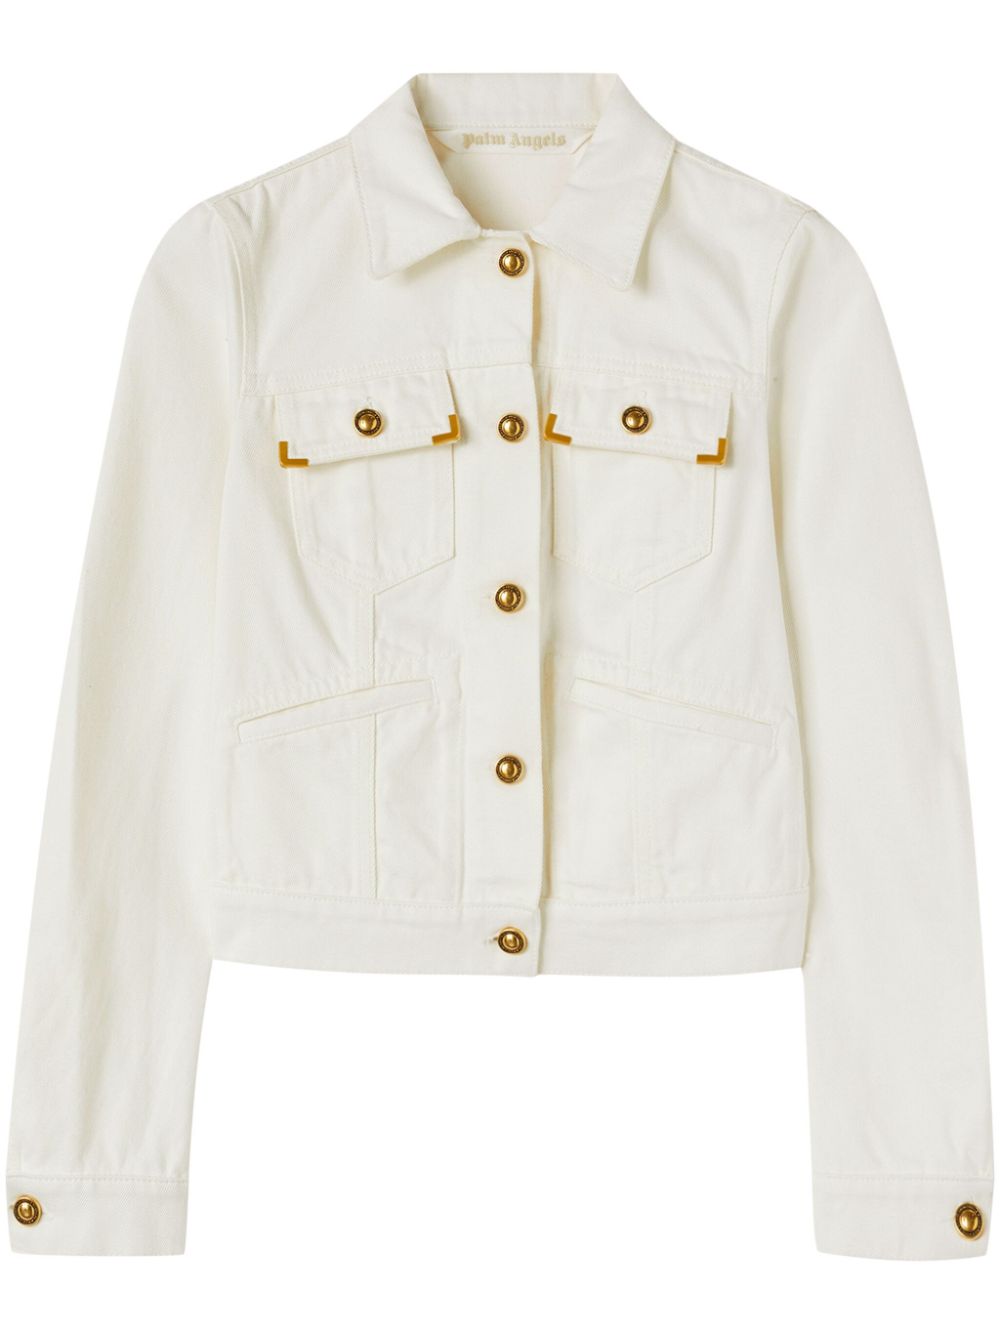 Shop Palm Angels White Denim Jacket With Golden Buttons